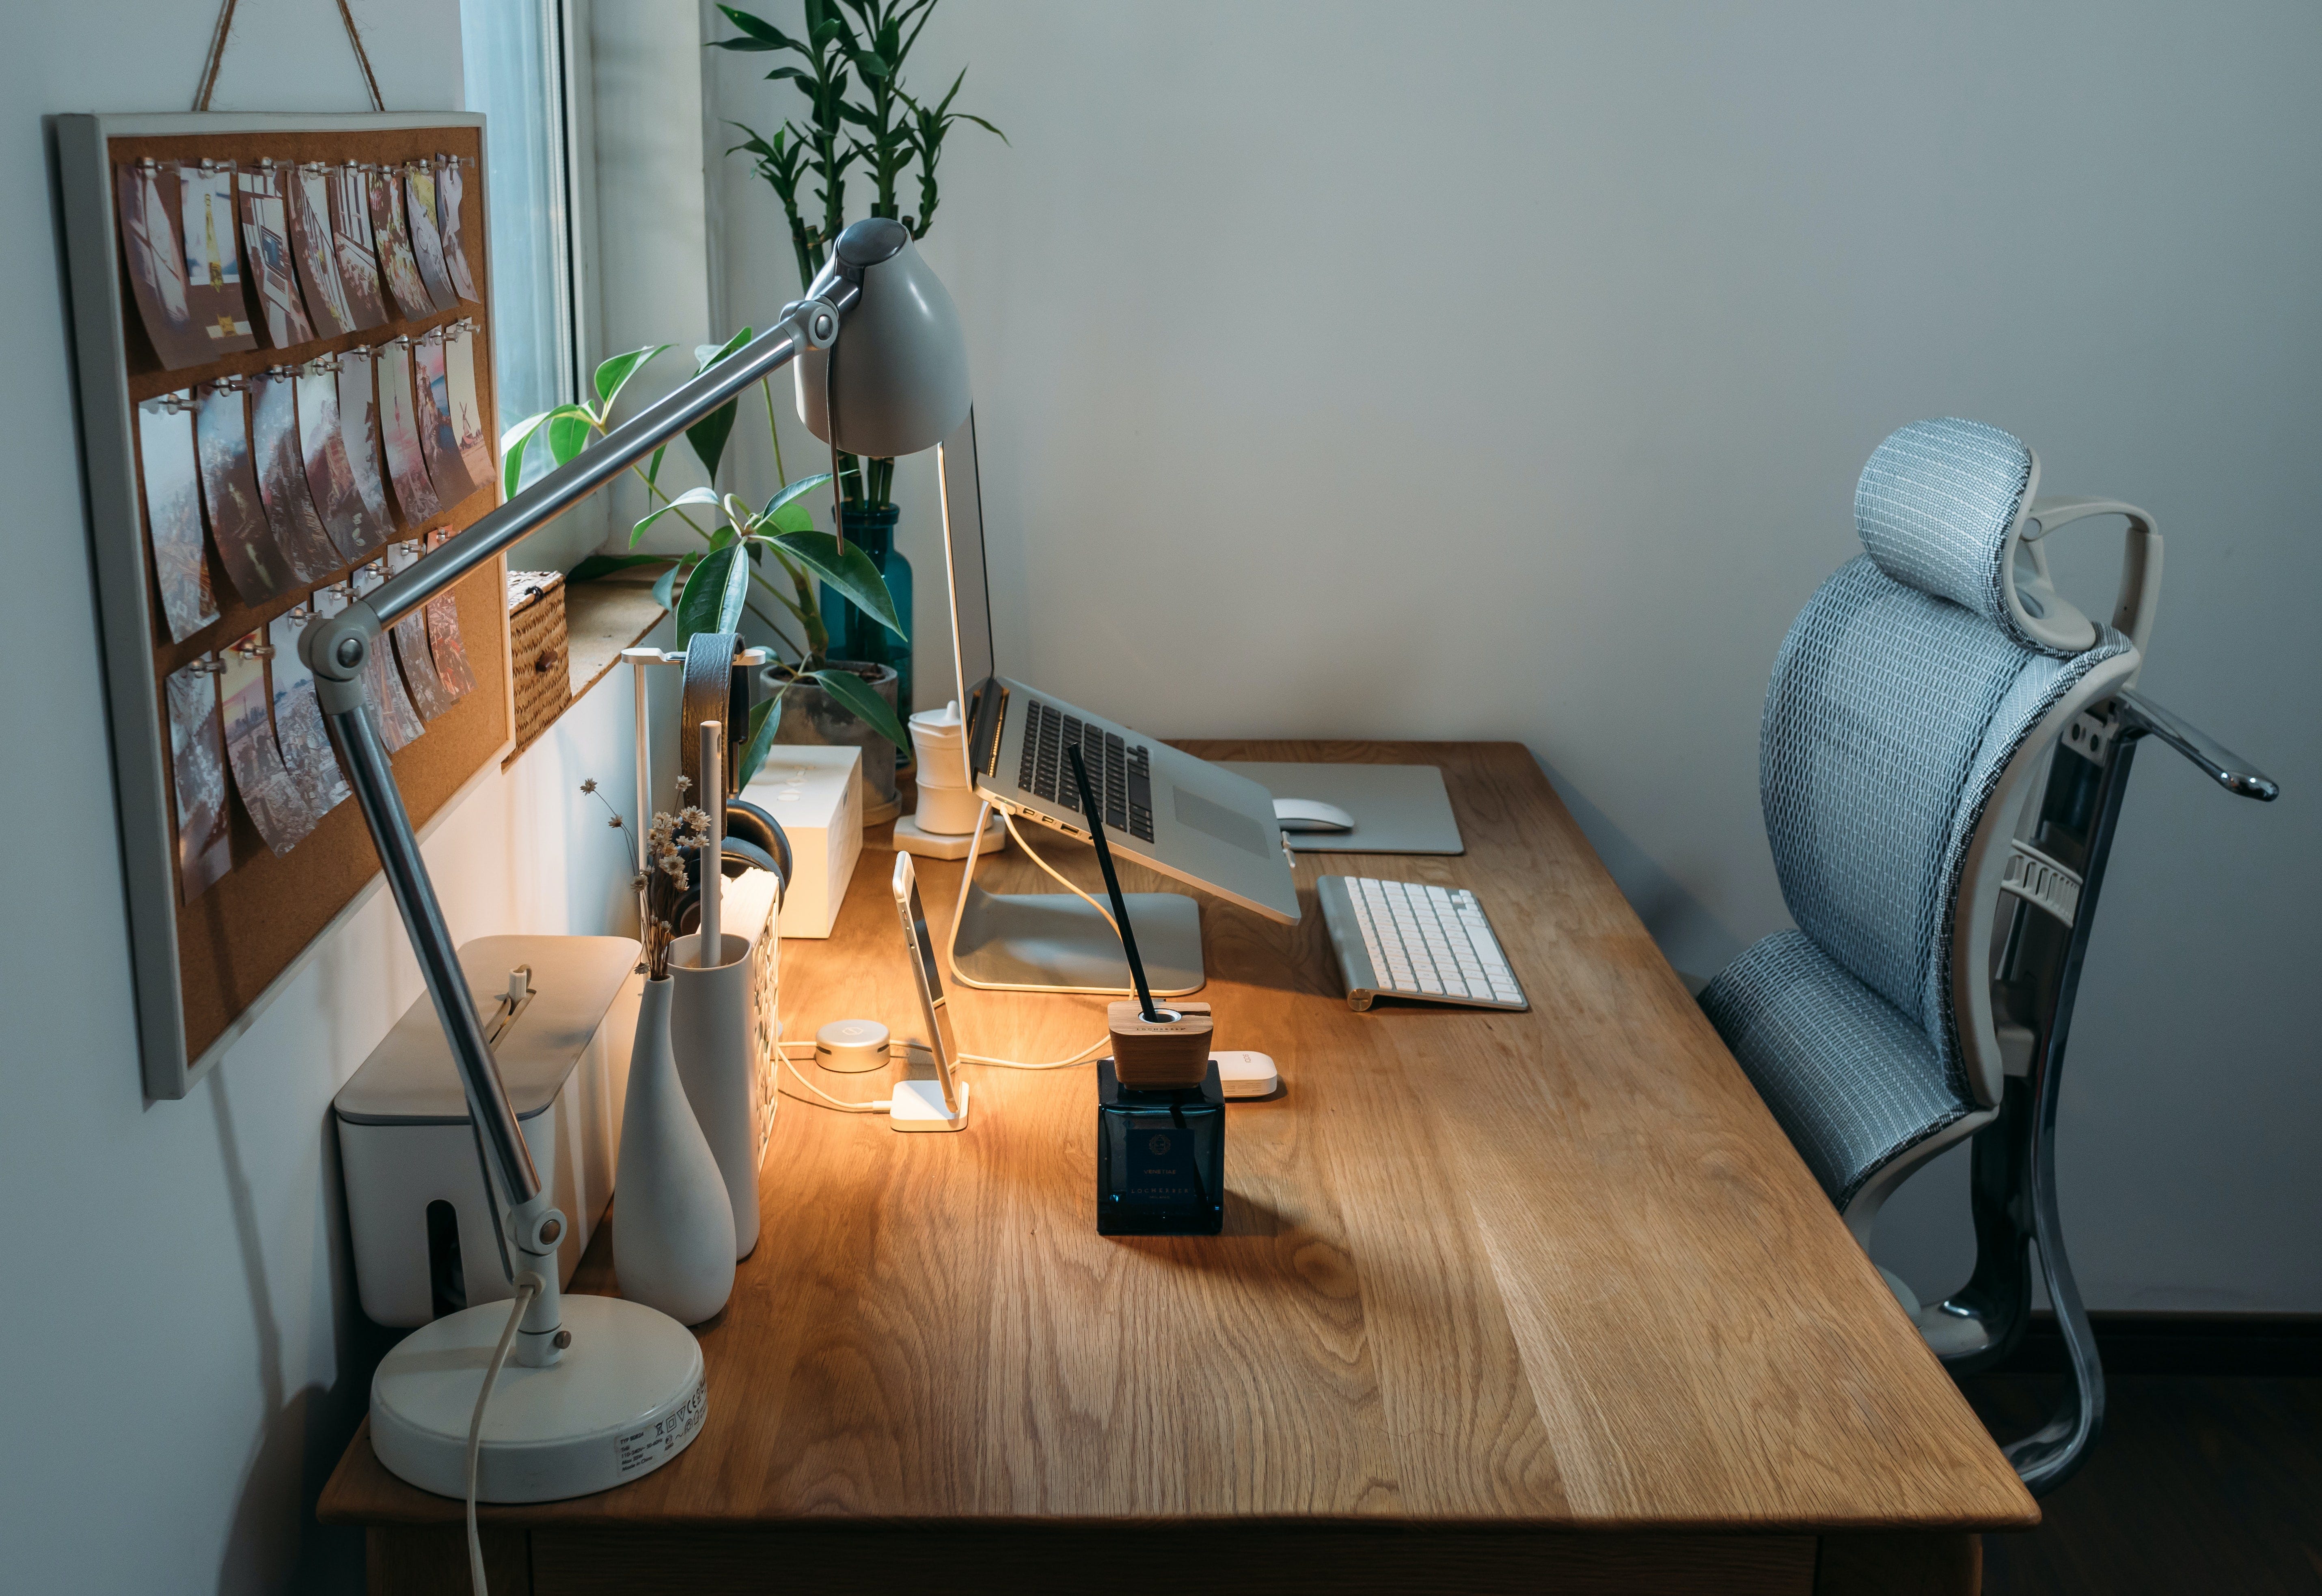  How To Have An Ergonomic Home Office for Streaming